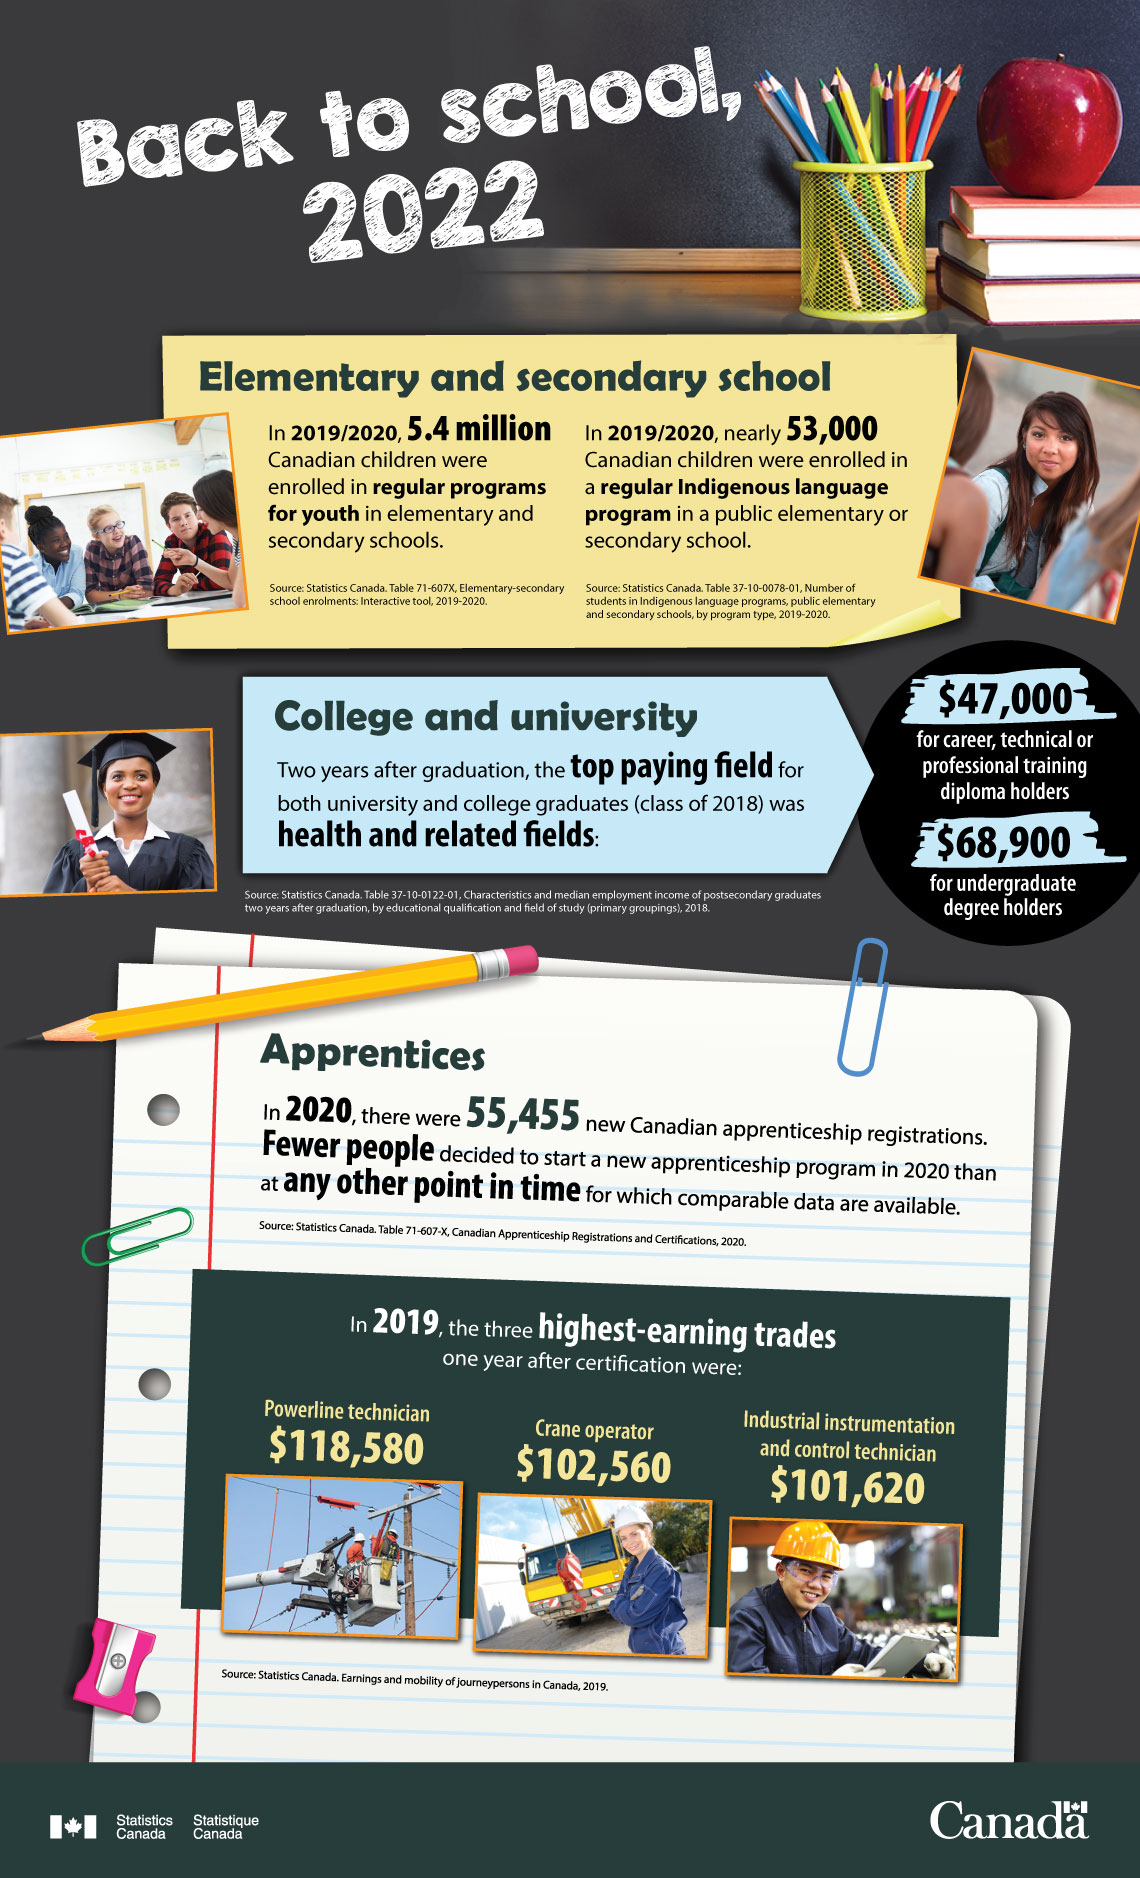 By the numbers - Back to School, 2022